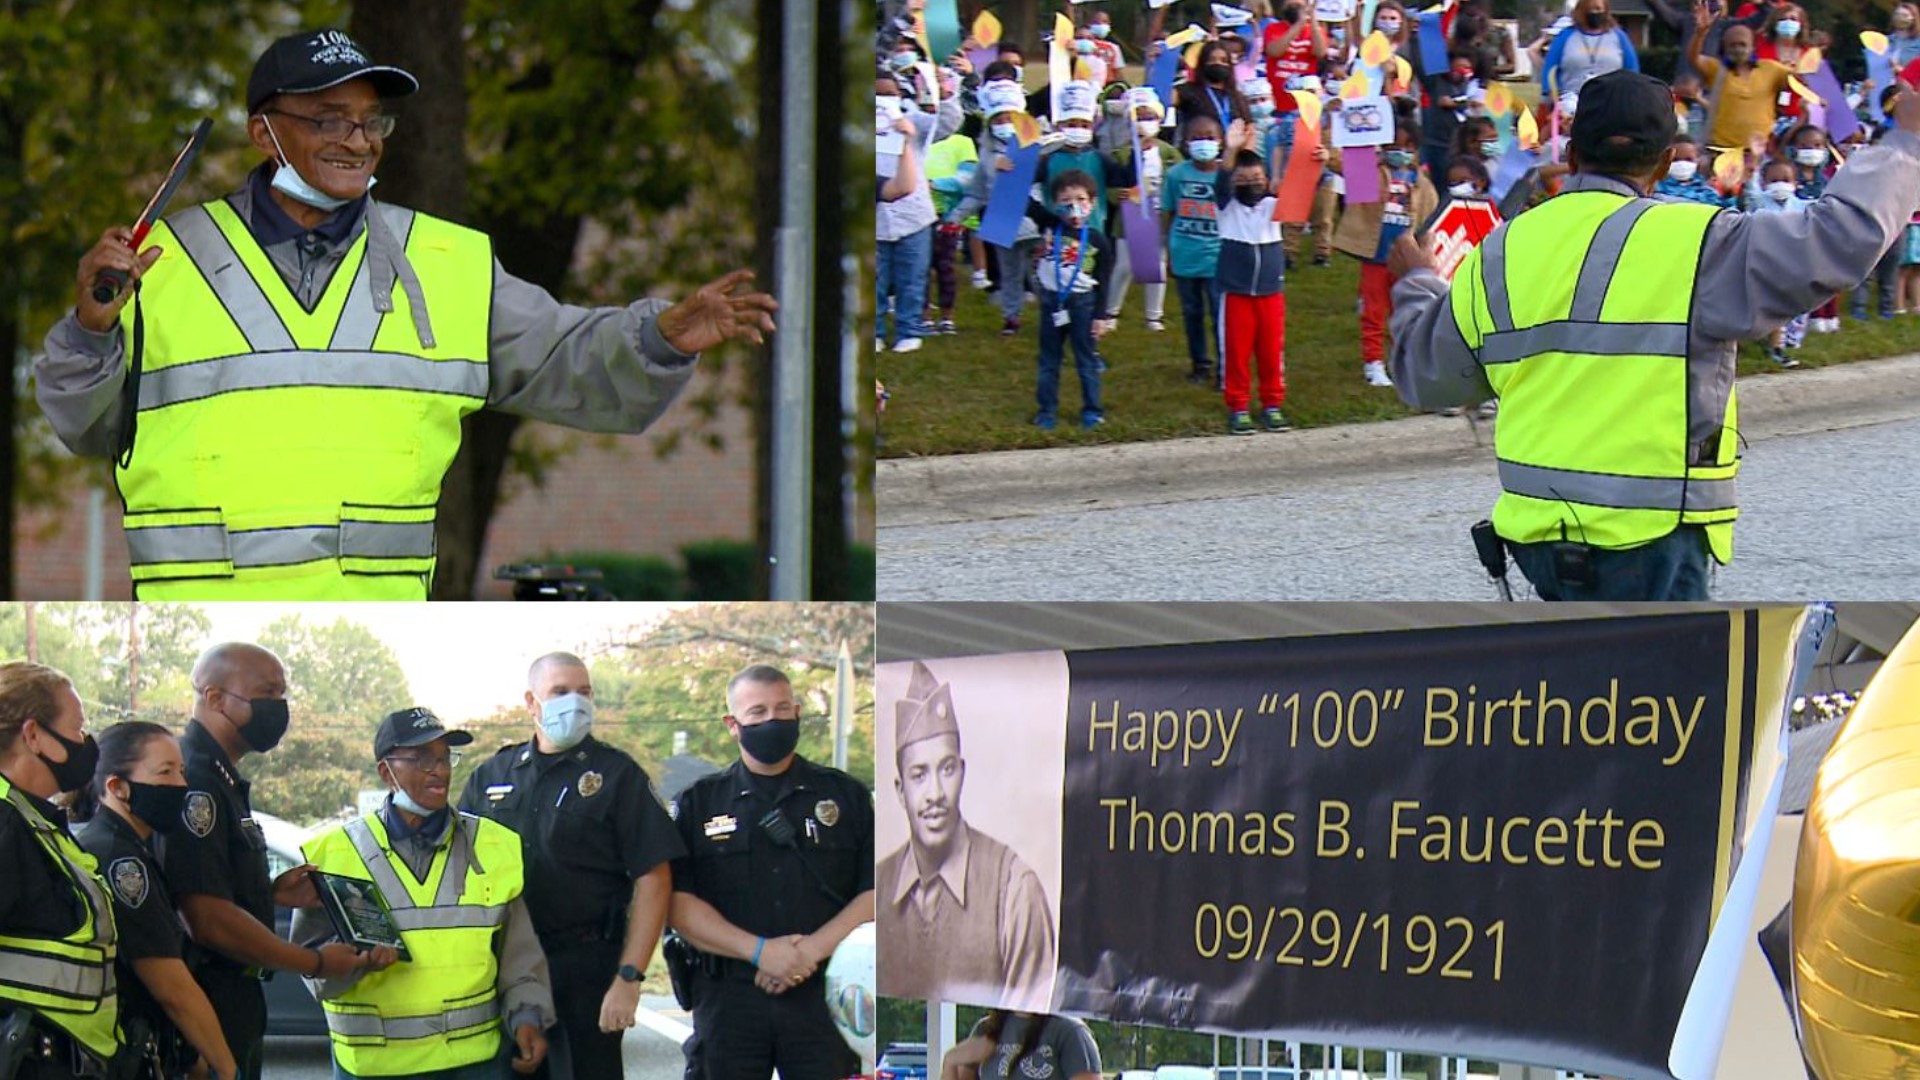 Mr. Thomas Faucette who’s a school crossing guard got a surprise celebration for this 100th birthday!